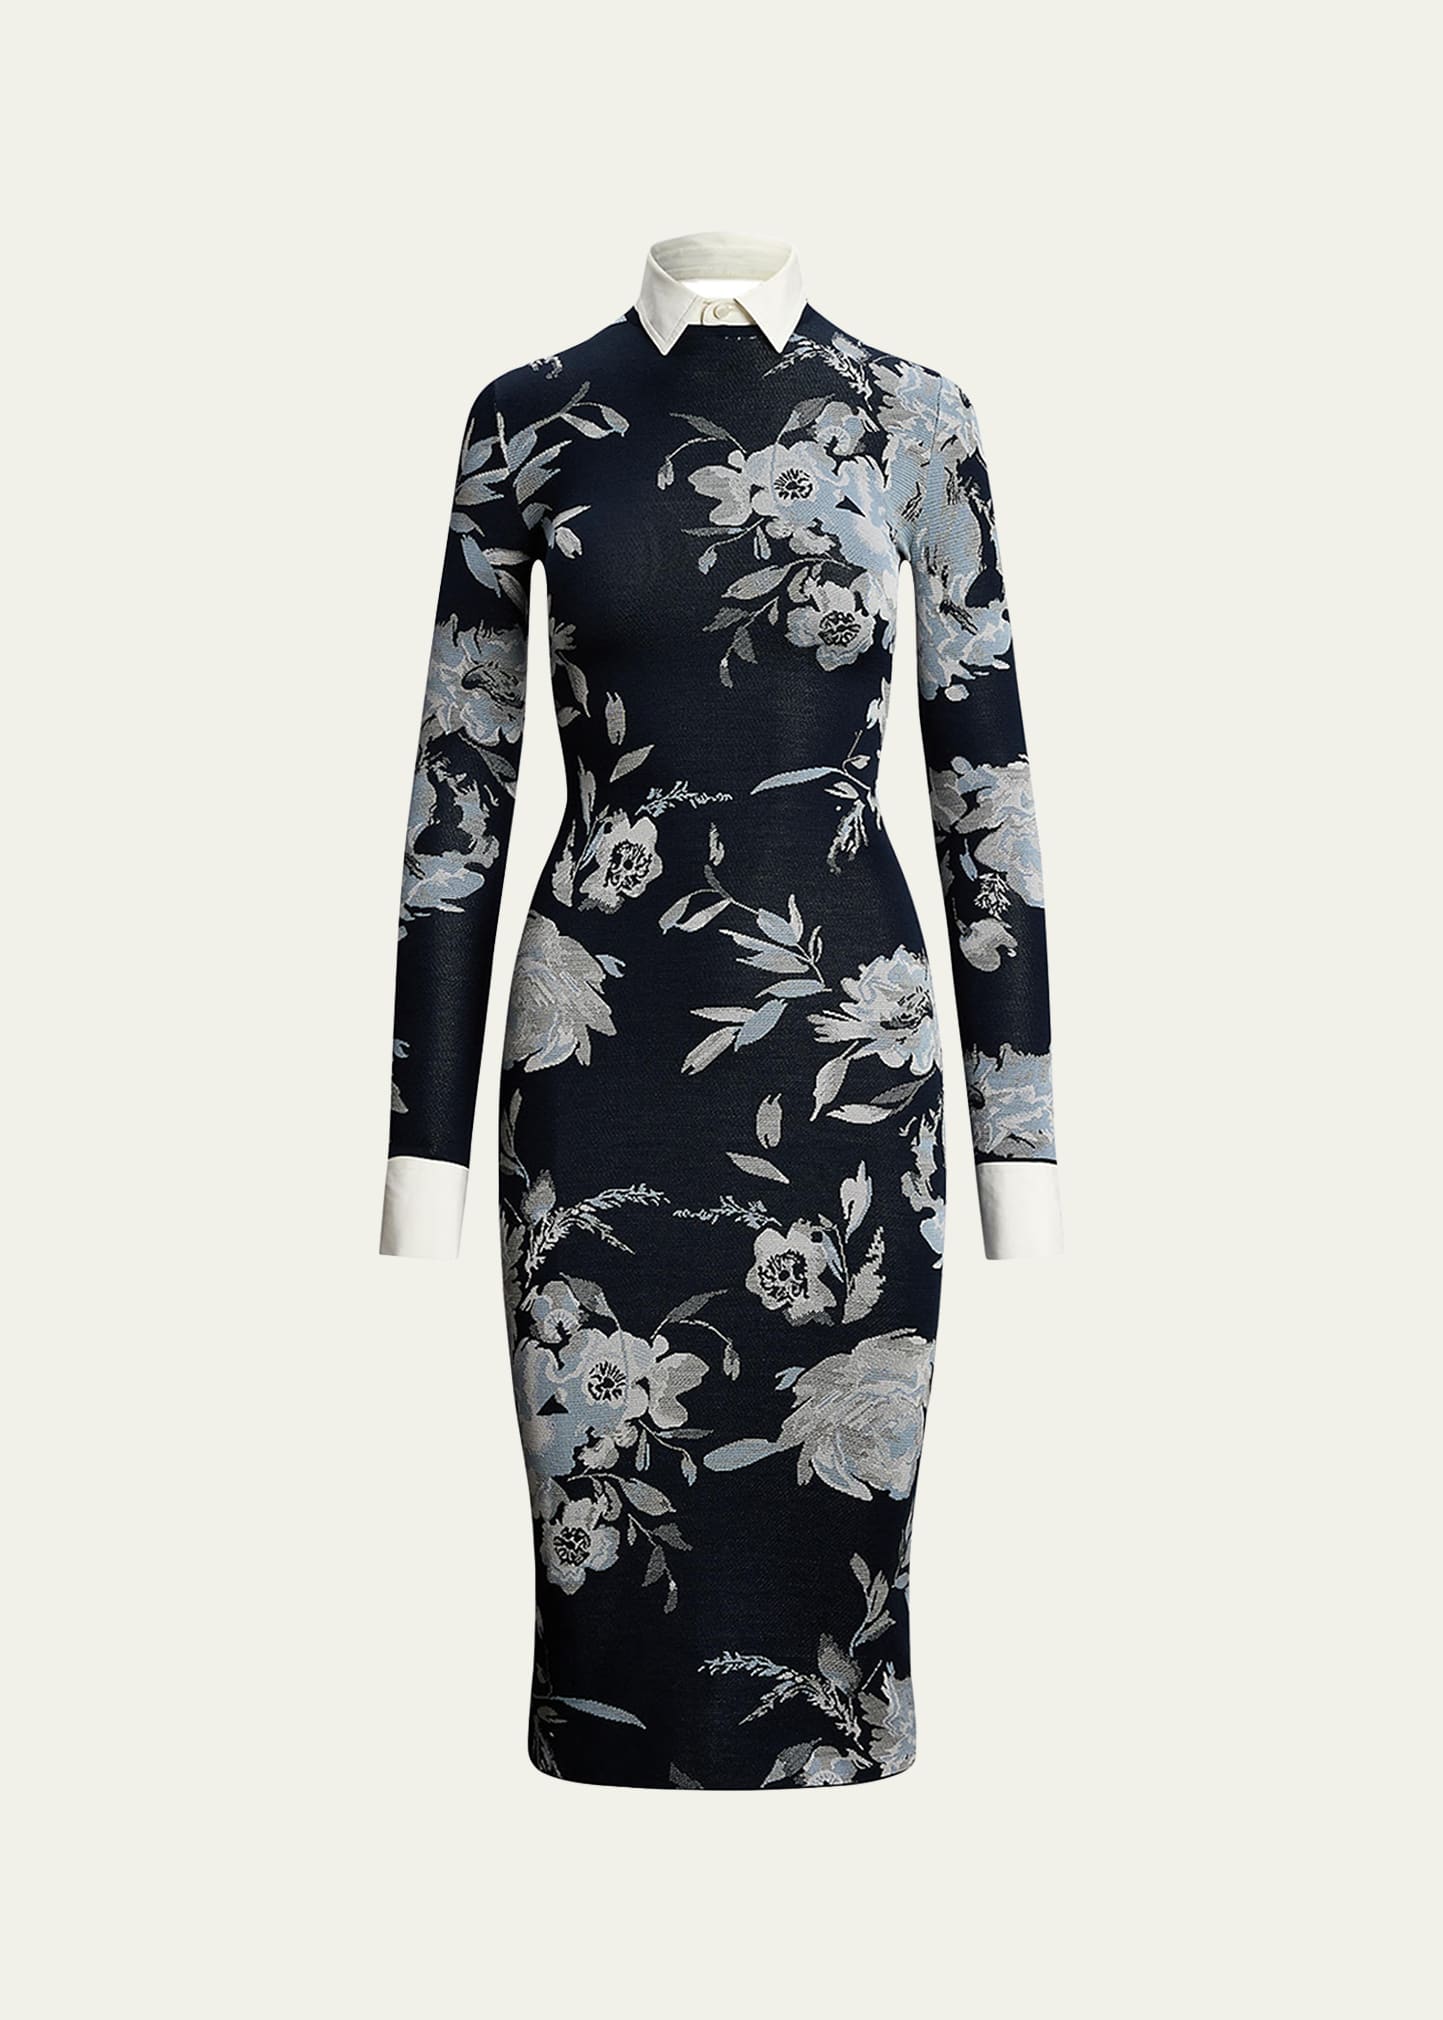 Ralph Lauren Floral Silk-blend Jacquard Sweater Day Dress With Detachable Collar & Cuffs In Navy Multi